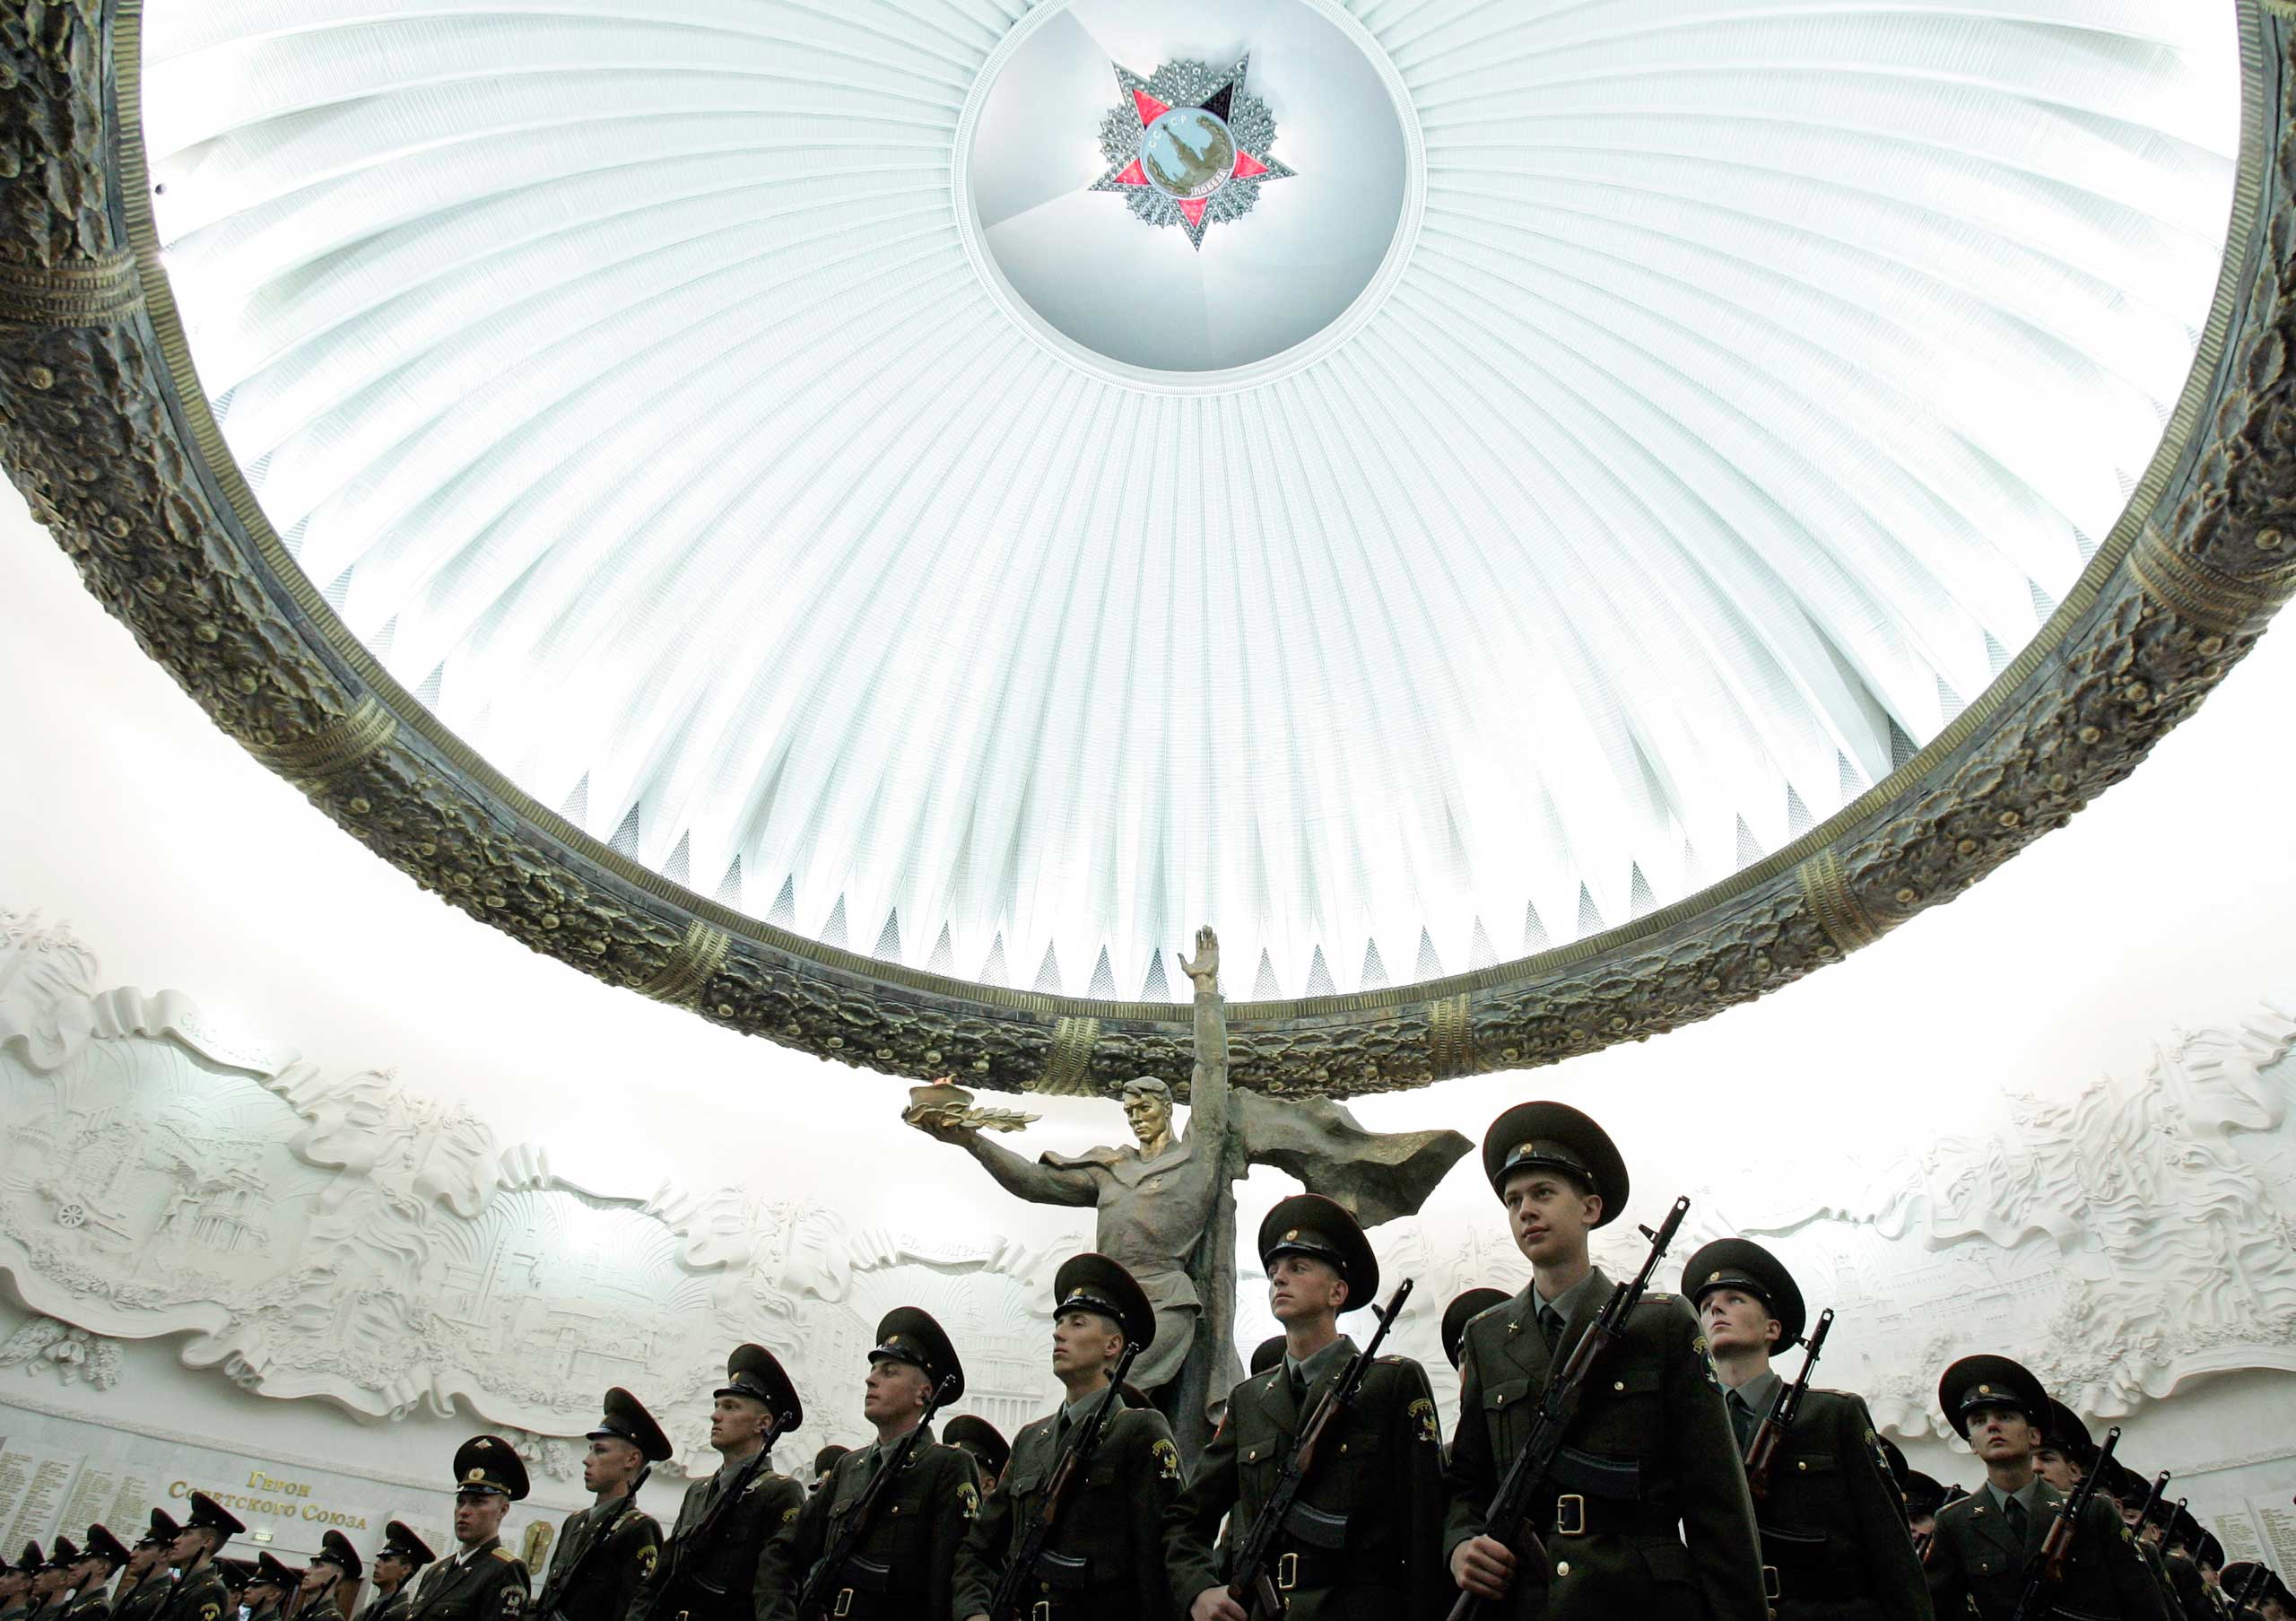 Soldiers stand in formation as they swear an oath at the World War Two museum on Poklonnaya Gora in Victory Park, Moscow in 2007. (Denis Sinyakov—Reuters)